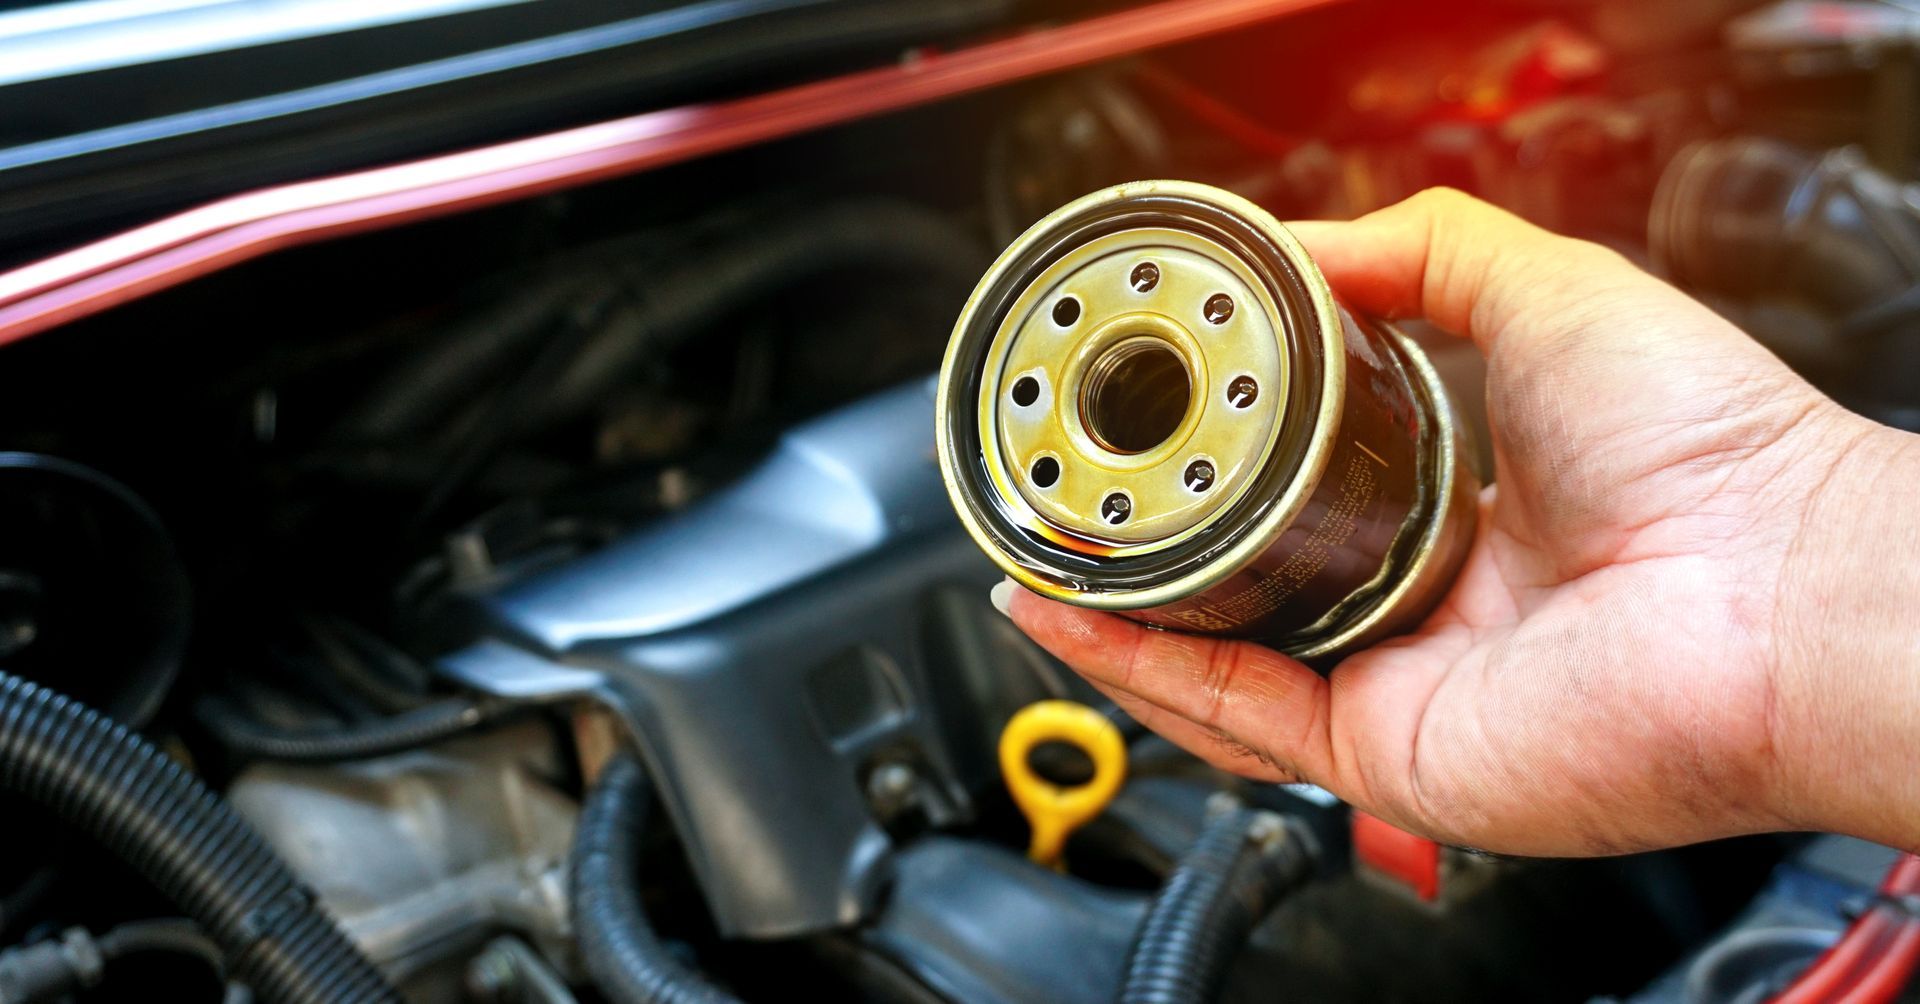 How To Change An Oil Filter In 9 Easy Steps | SMI Automotive Service
